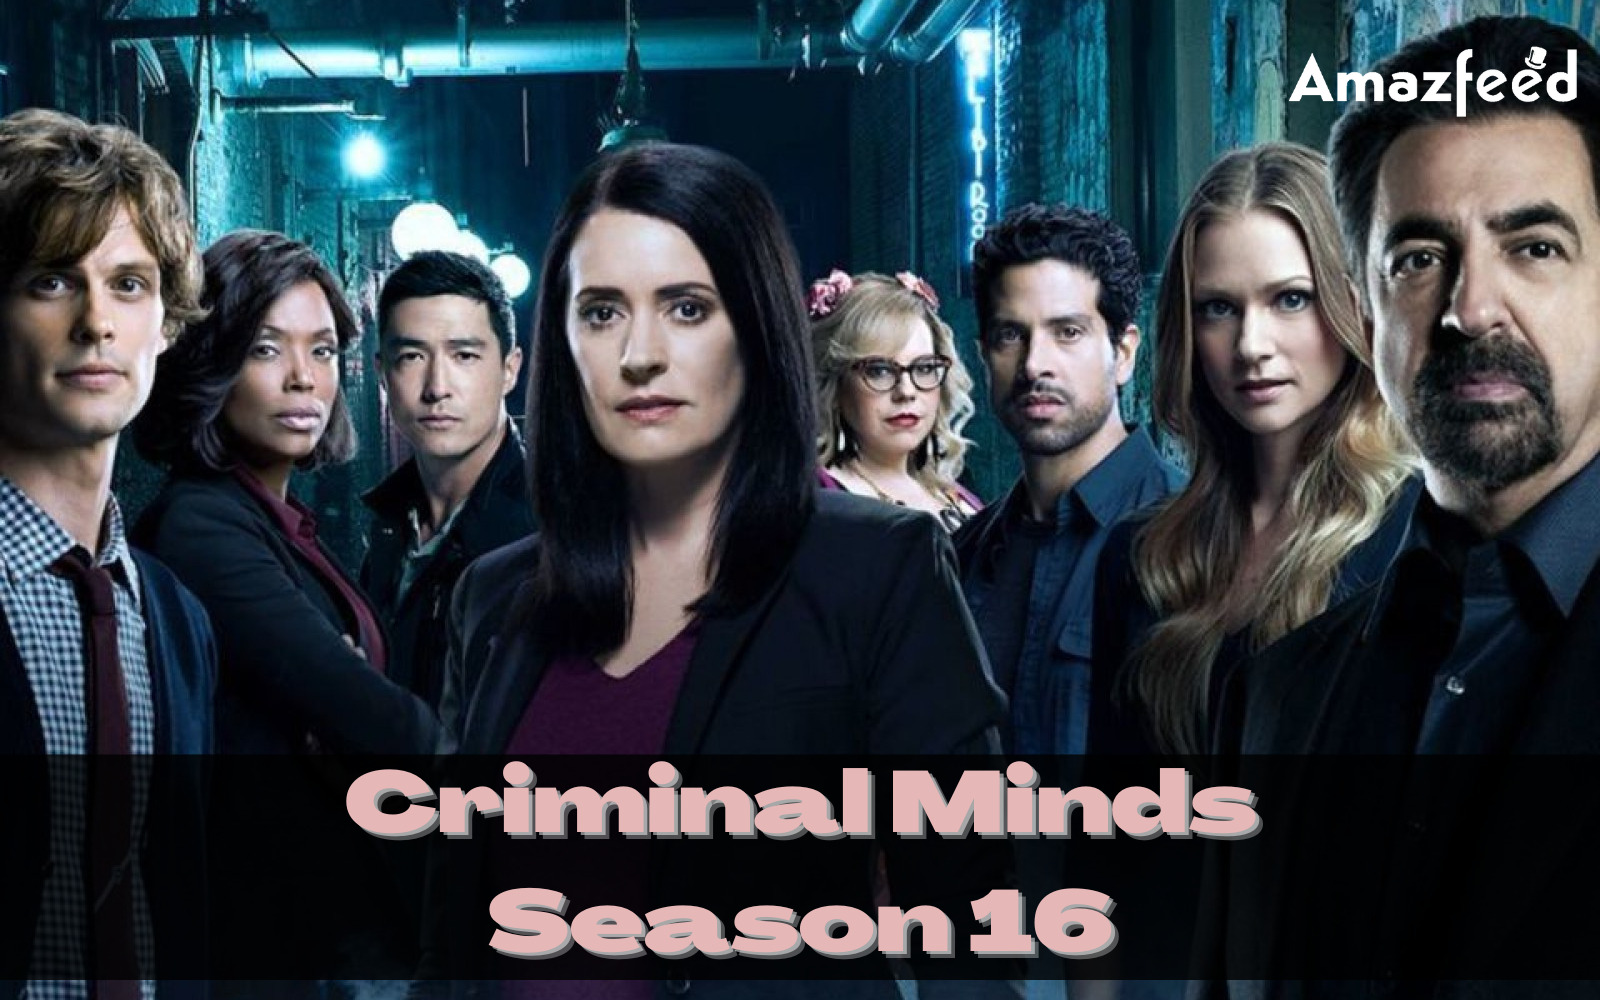 How Many Episodes Will Criminal Minds Season 16 Have